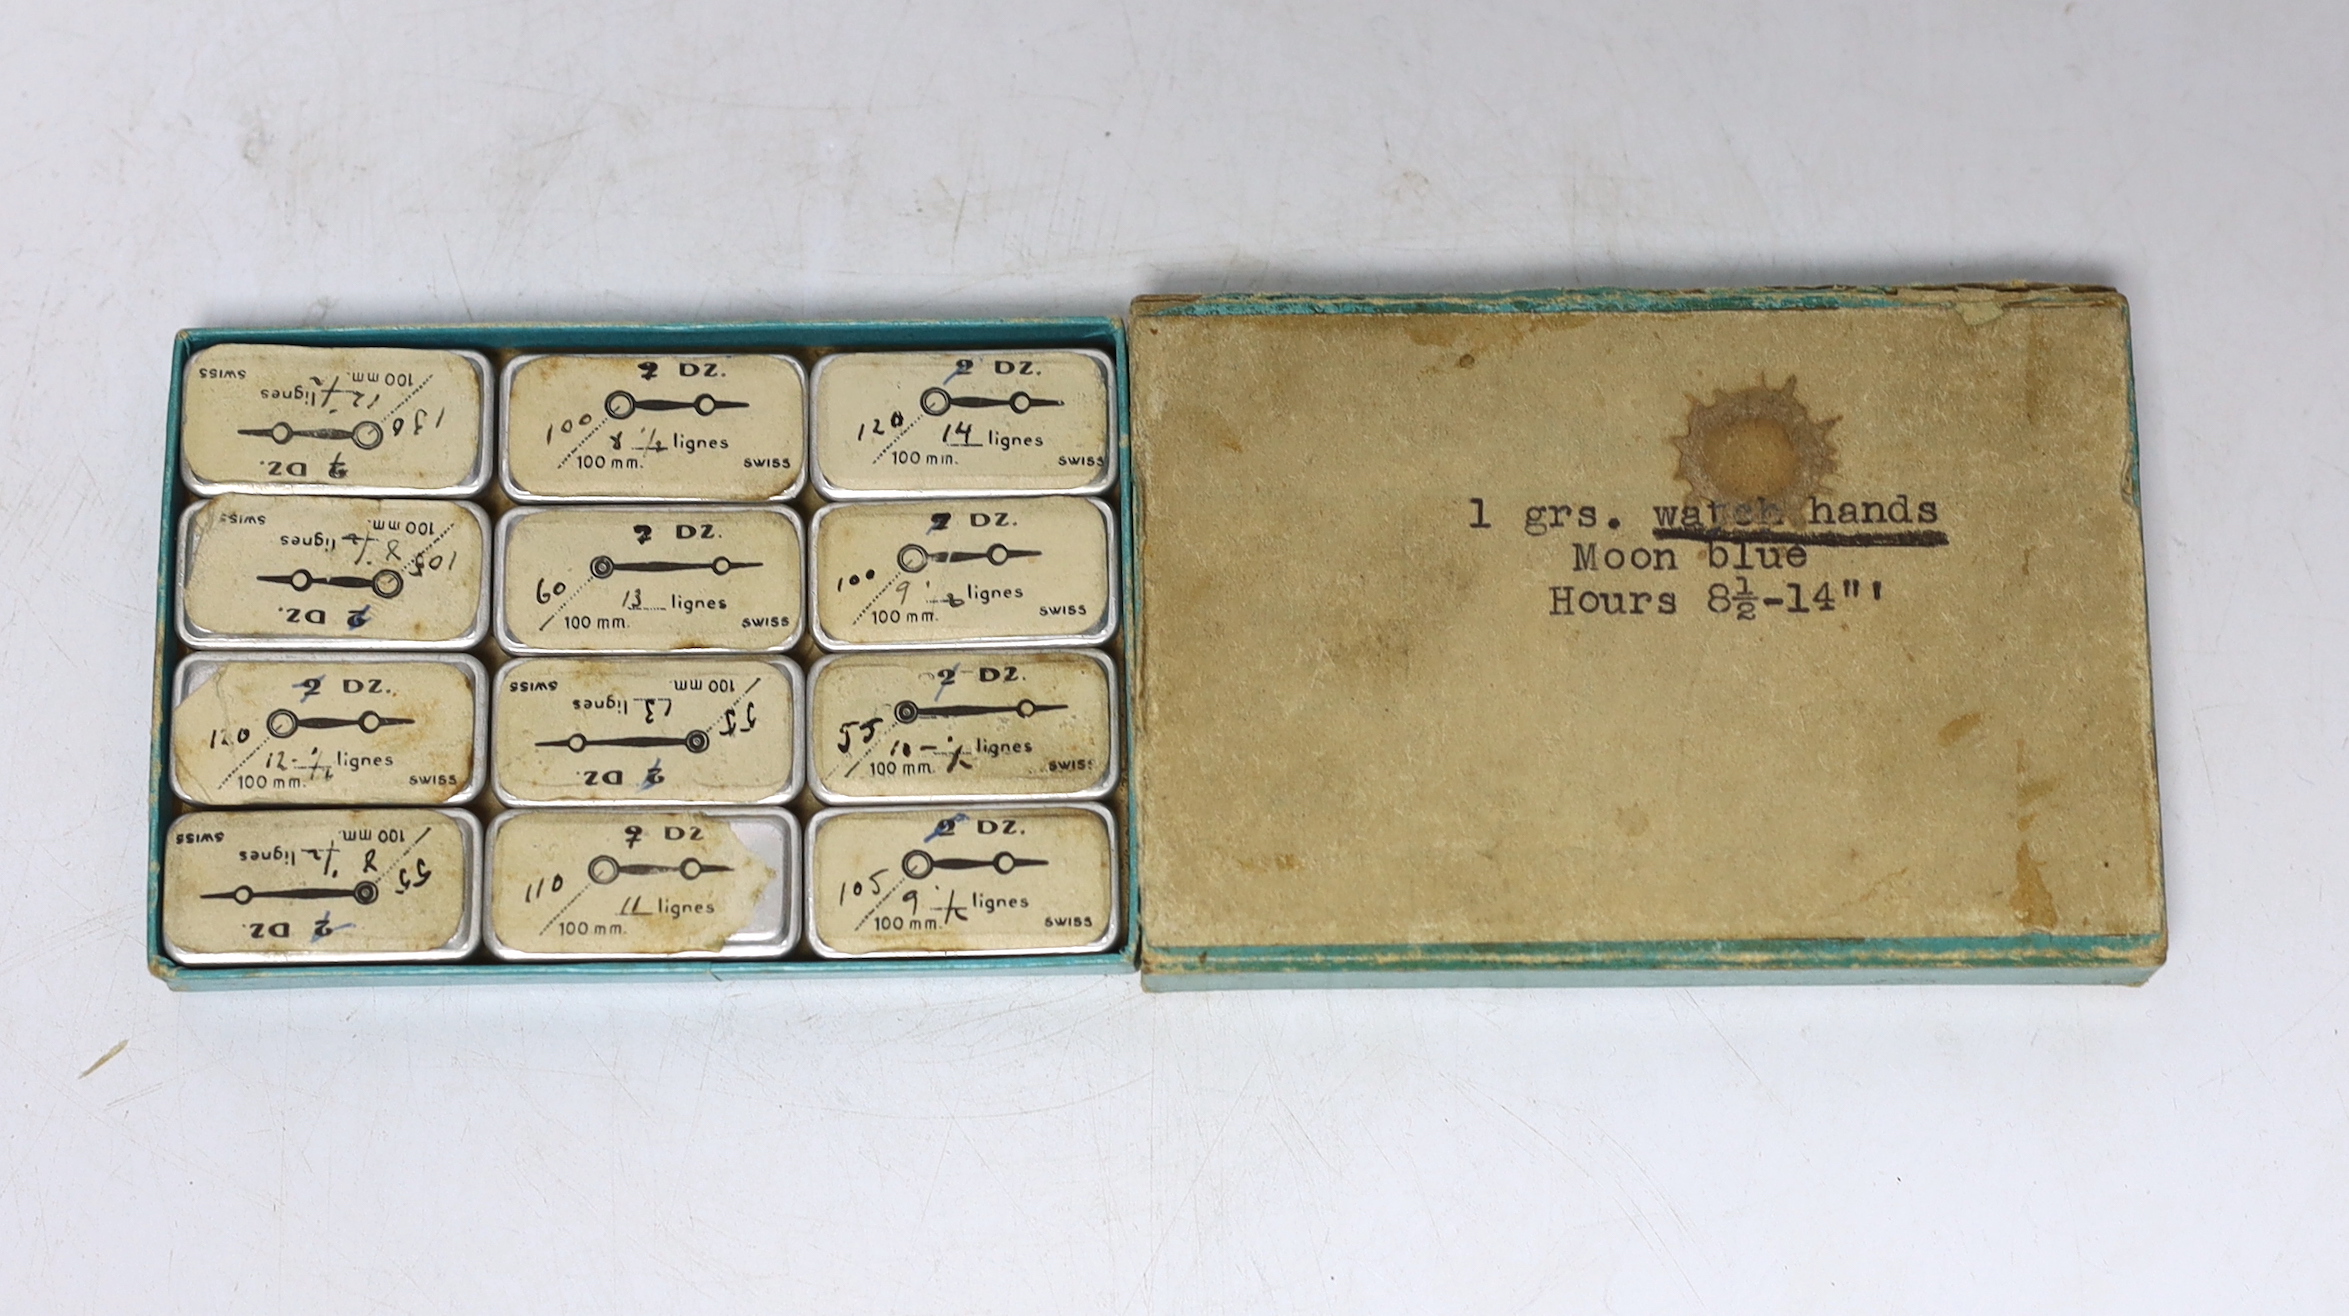 A sample box of vintage Swiss ‘Moon Blue Hours’ watch hands